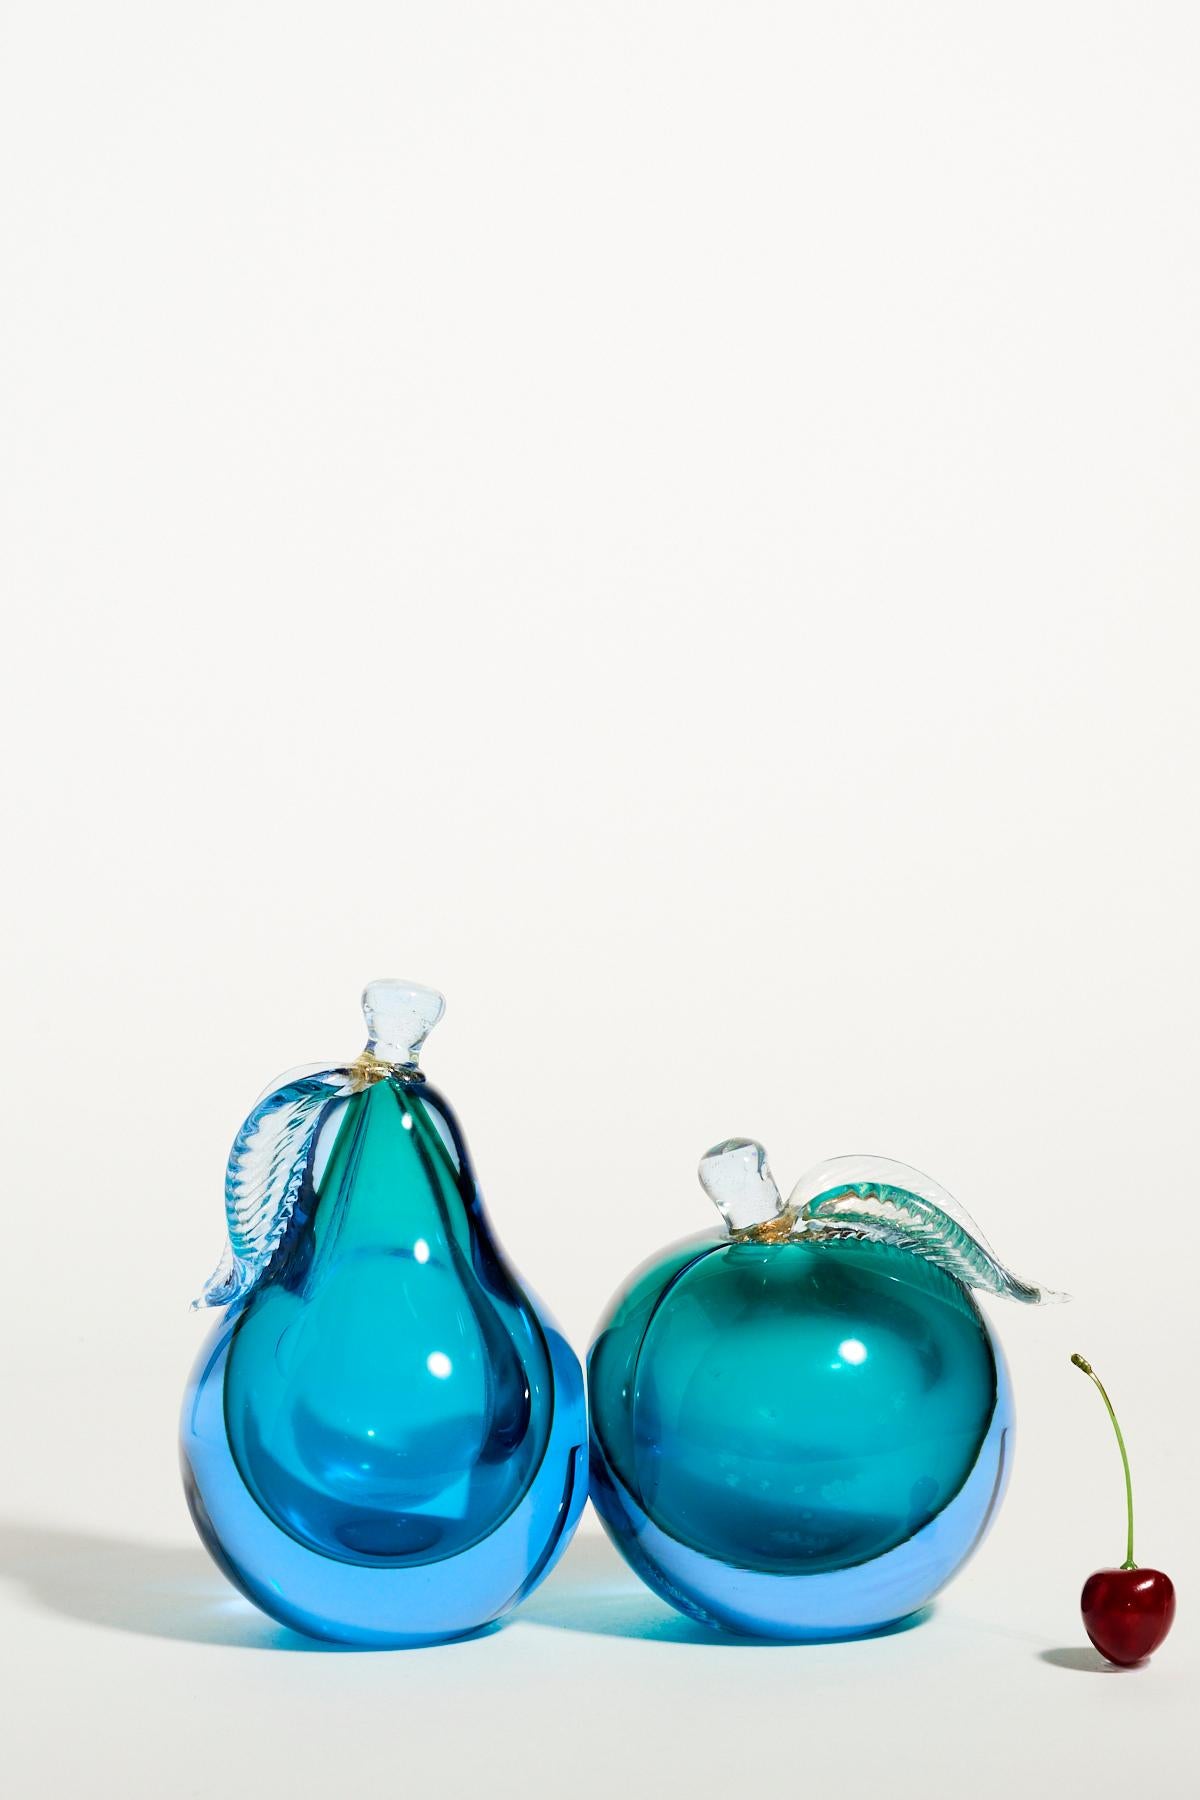 Murano Glass Blue Apple and Pear Bookends 6